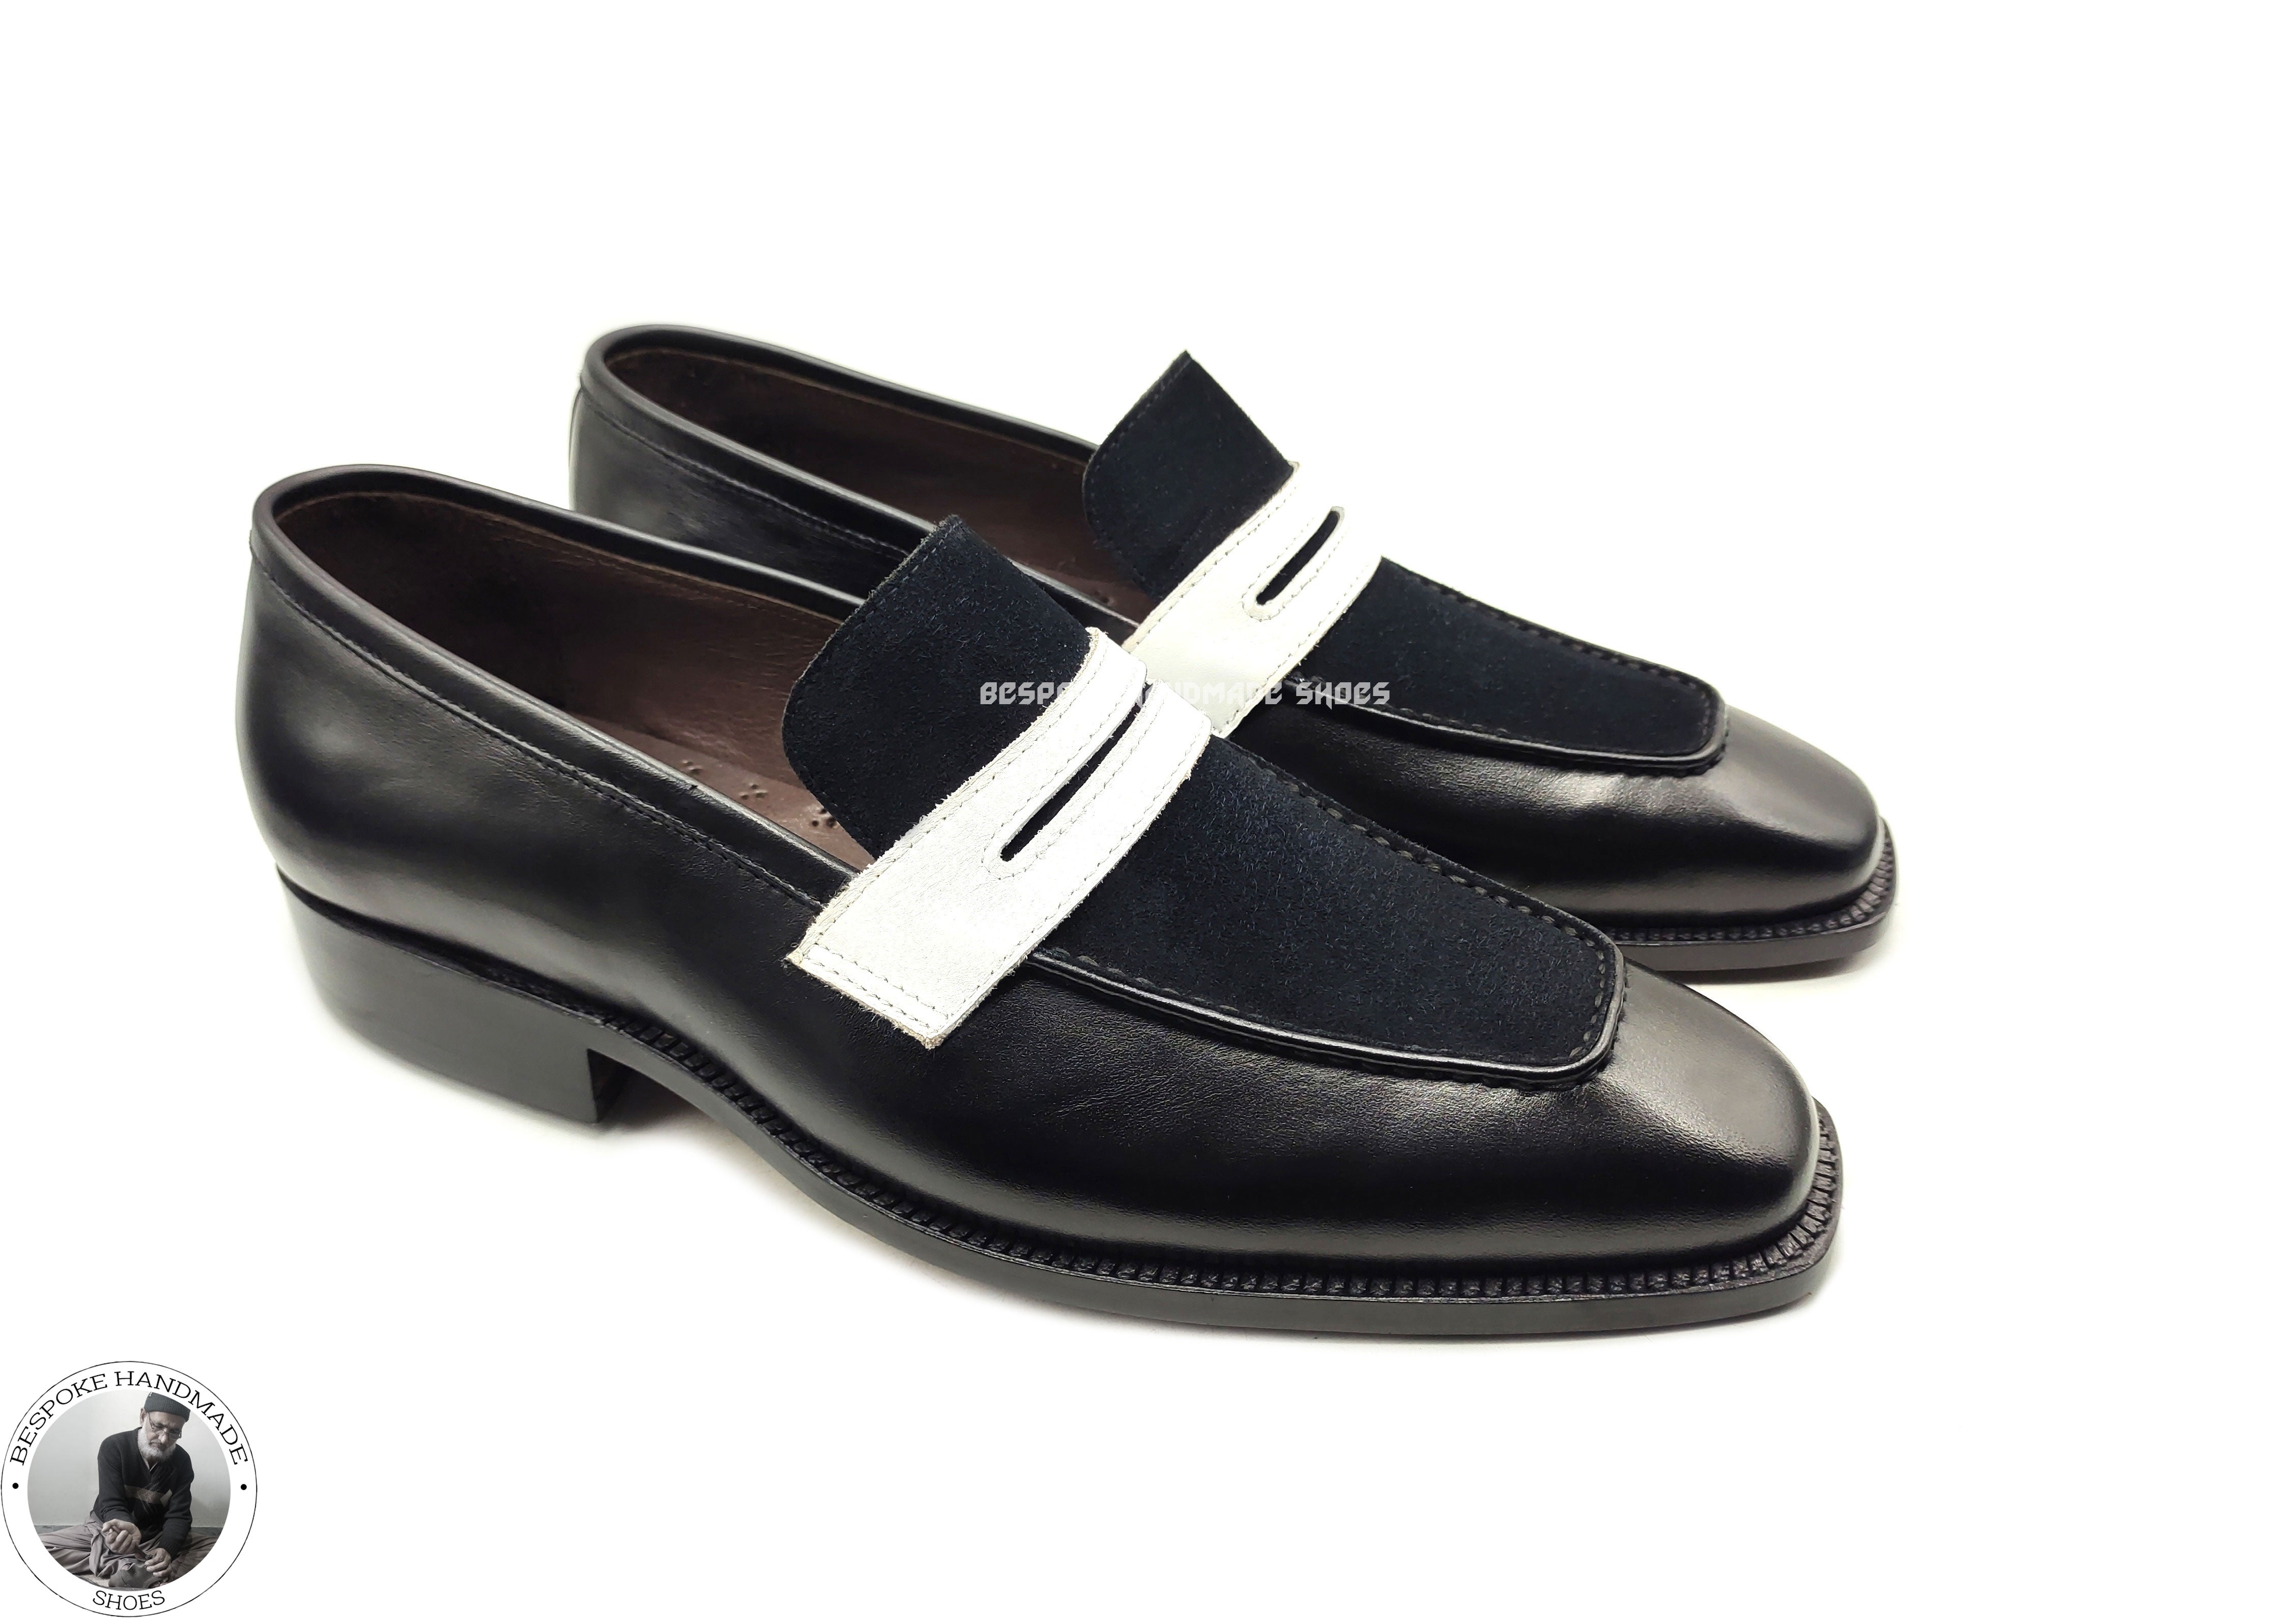 Men's Handcrafted Leather Shoes, Black and White Leather Suede Slip on Casual Shoes